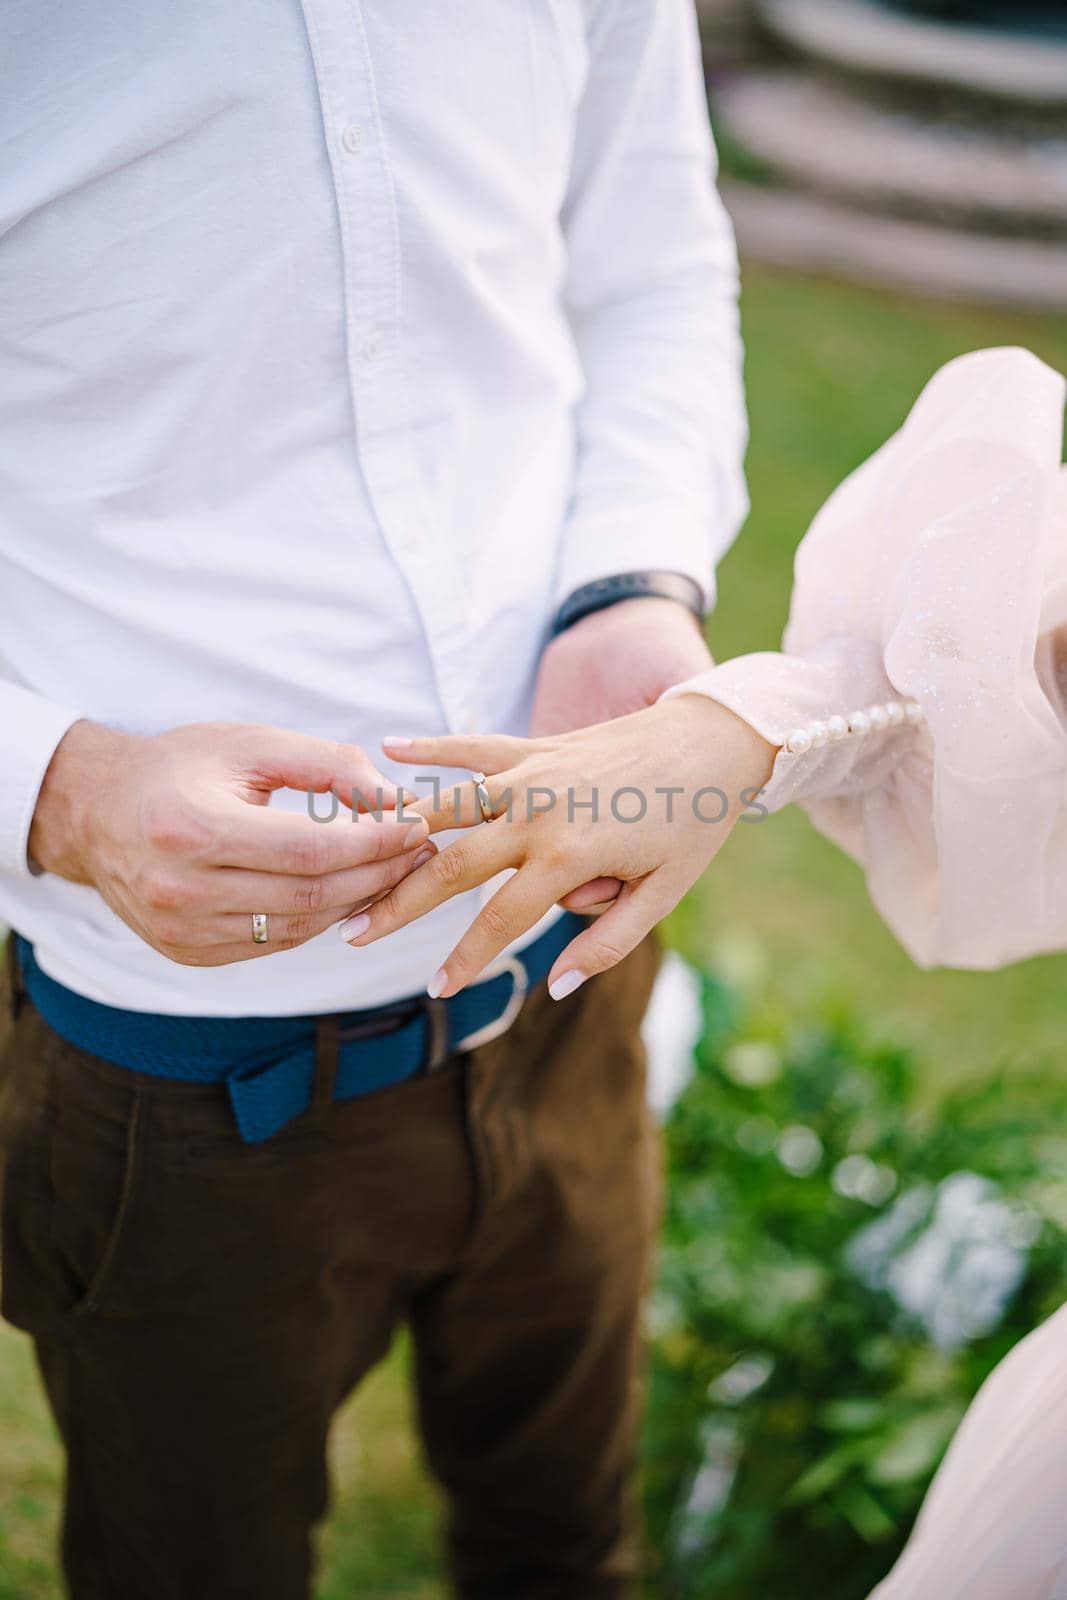 Wedding at an old winery villa in Tuscany, Italy. The groom puts the wedding ring on the brides finger, close-up of hands.